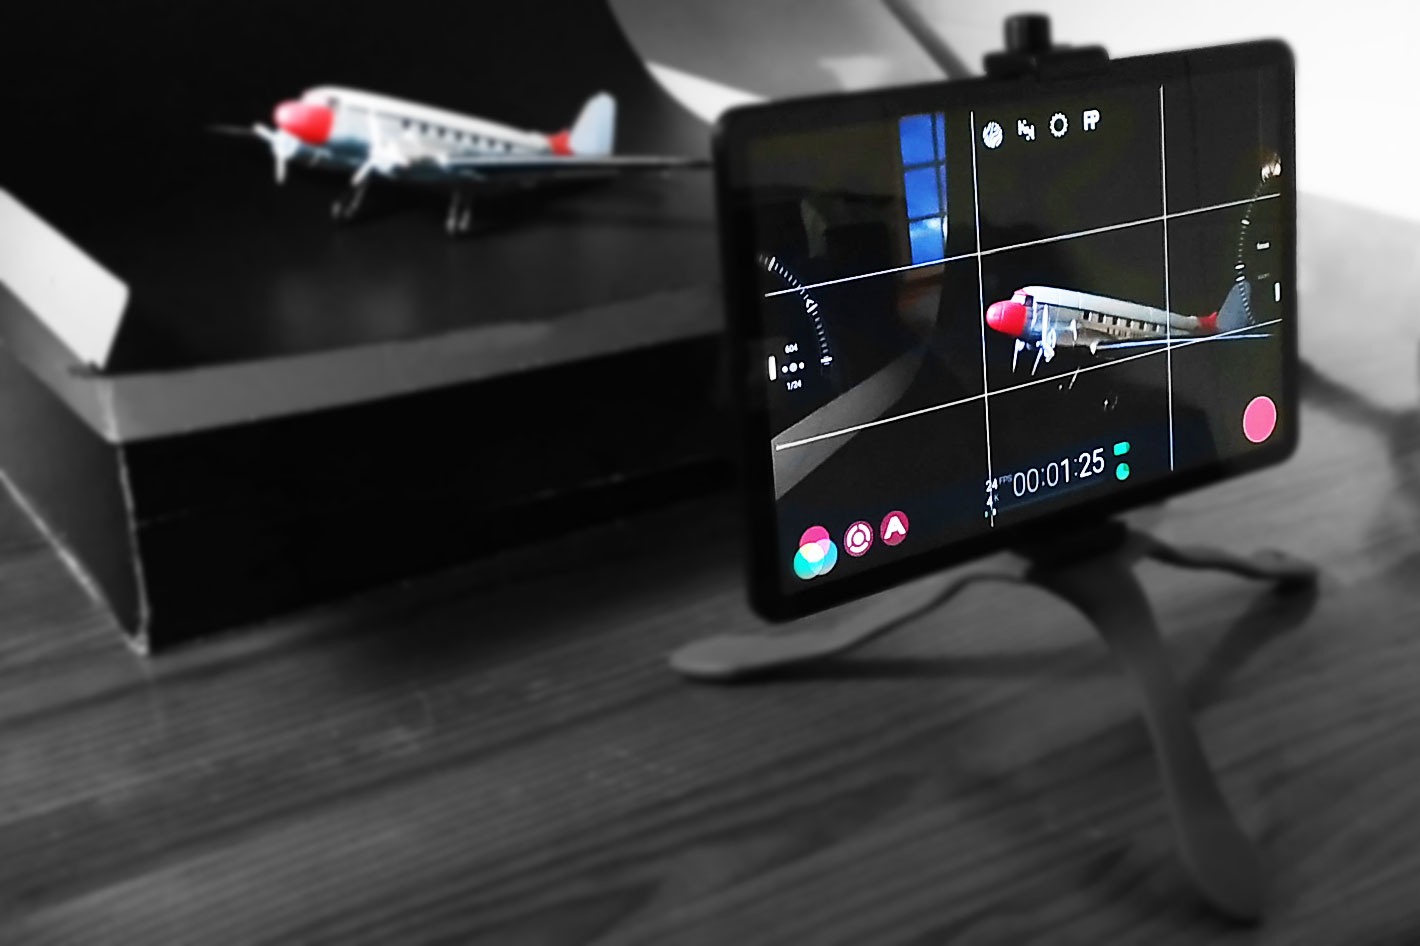 Review: using FiLMiC Pro with a large tablet screen